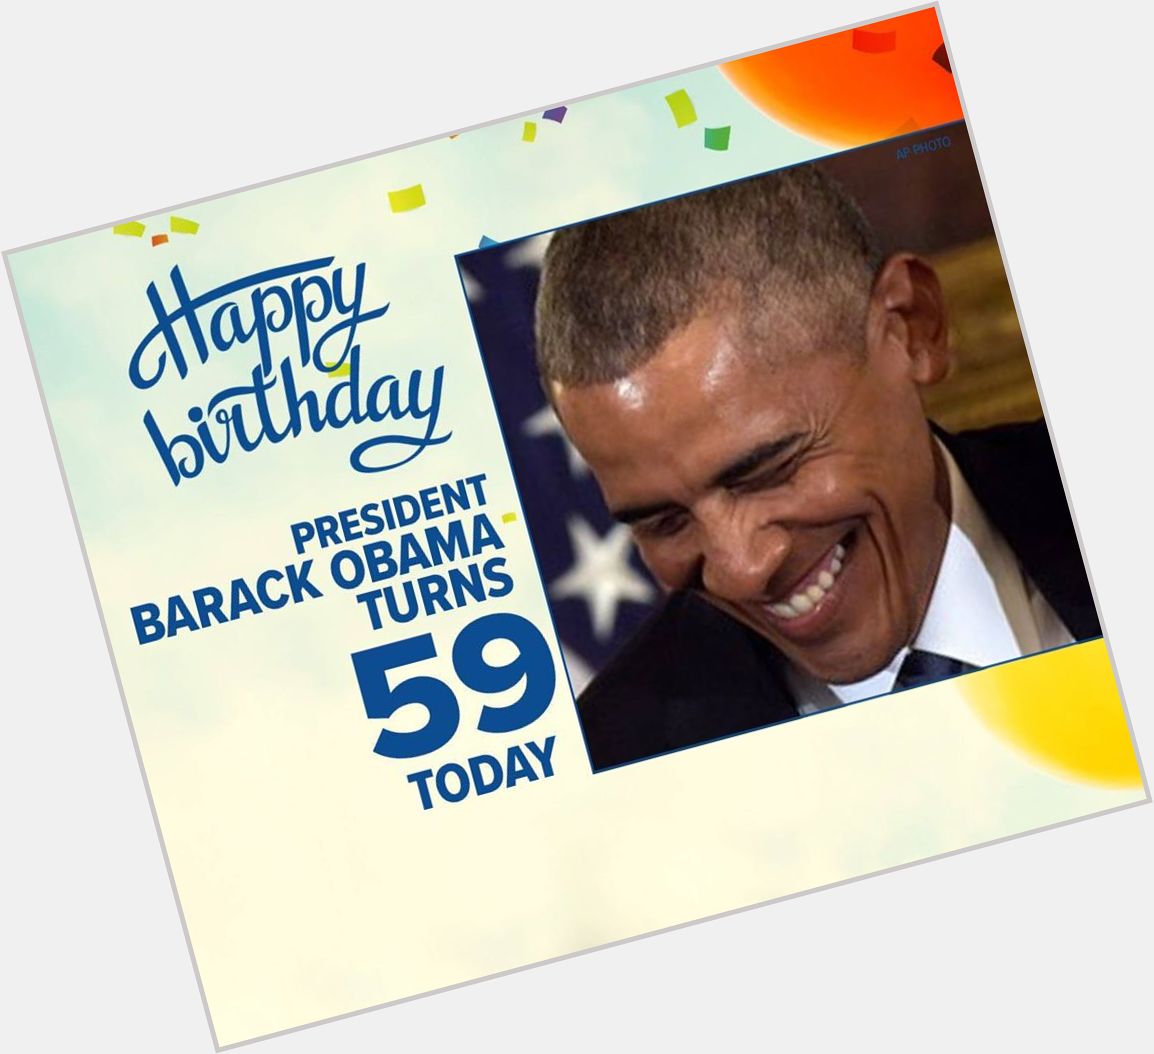 On this day in 1961, former President Barack Obama was born in Hawaii. Happy birthday,  